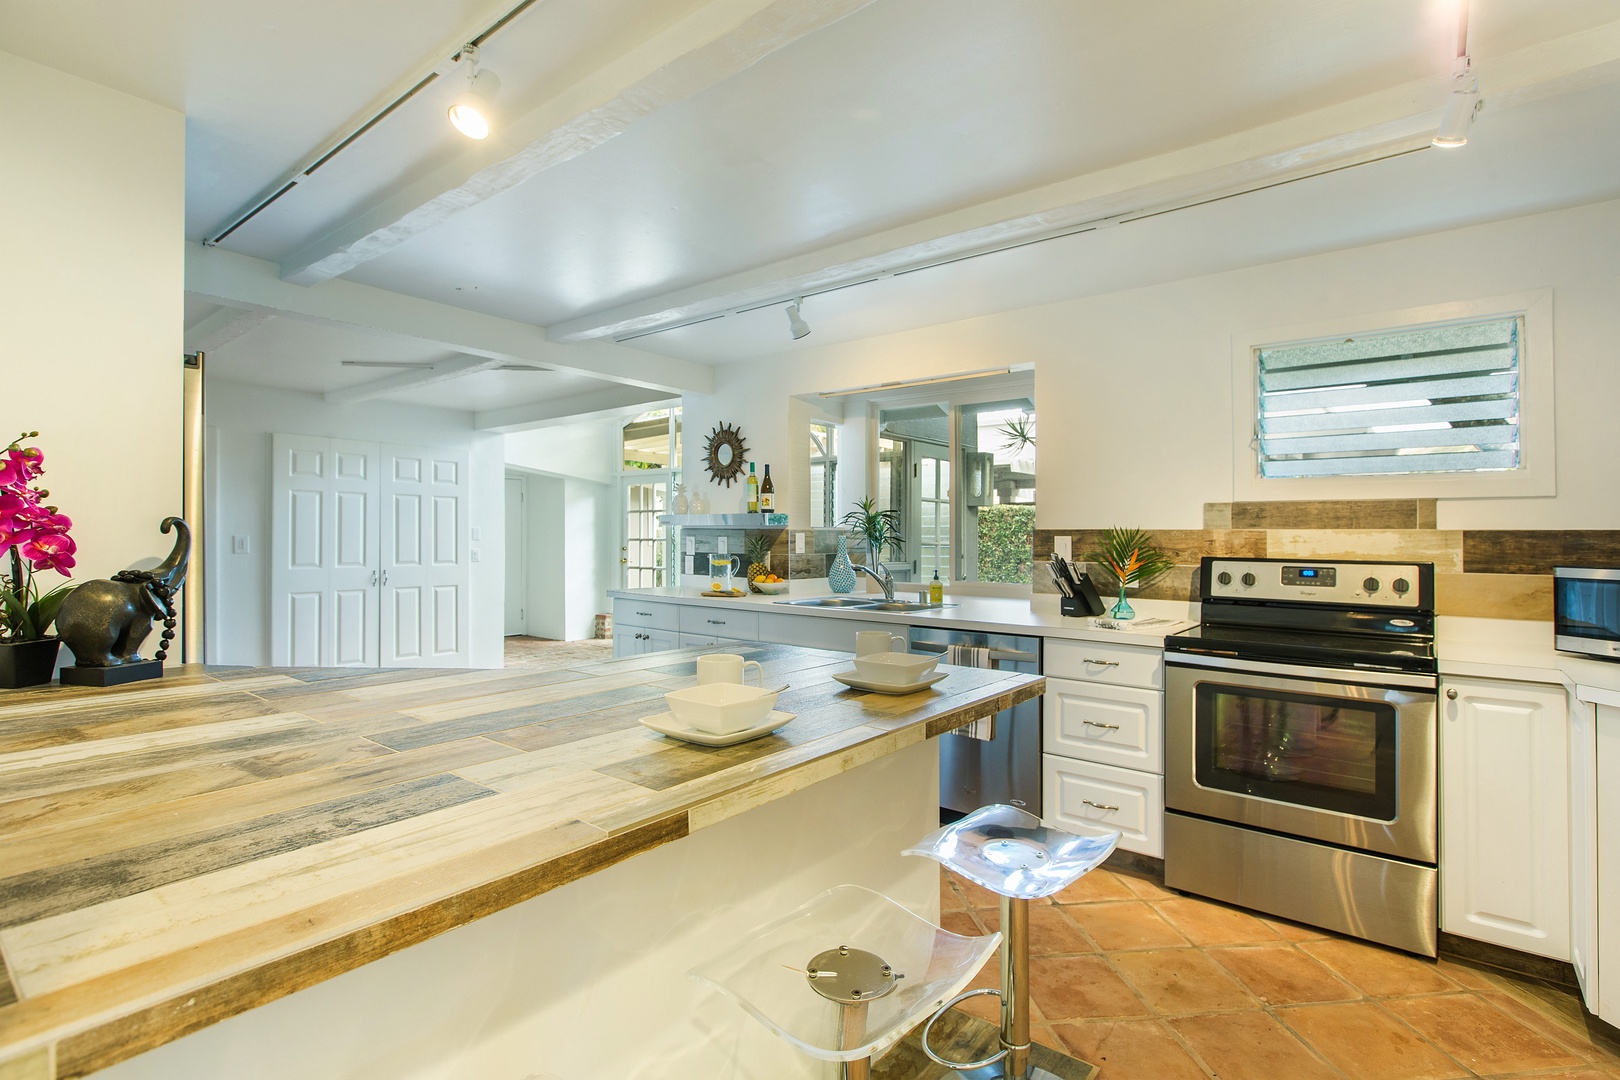 Honolulu Vacation Rentals, Hale Kai - The newly remodeled kitchen has seating for three at the breakfast bar, ample cooking space, and nice airy windows throughout.